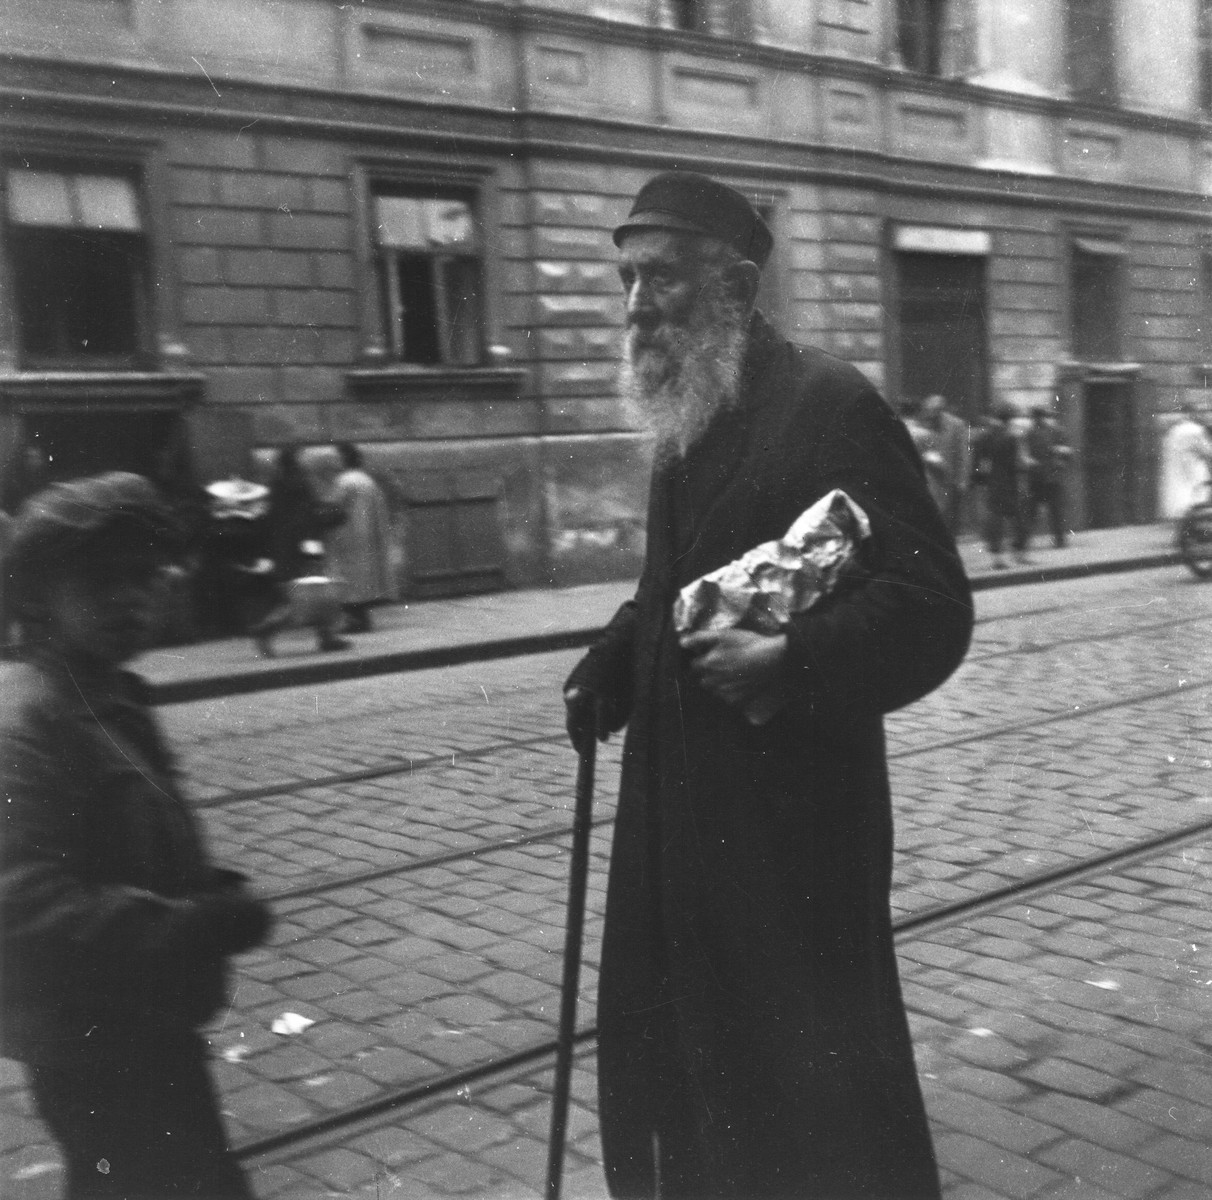 An elderly Jew holding a package and a cane walks along a commercial street in the Warsaw ghetto.  

Joest's original caption reads: "It struck me like an image out of the Old Testament--this old man with a small bundle in his arm, walking towards certain death."